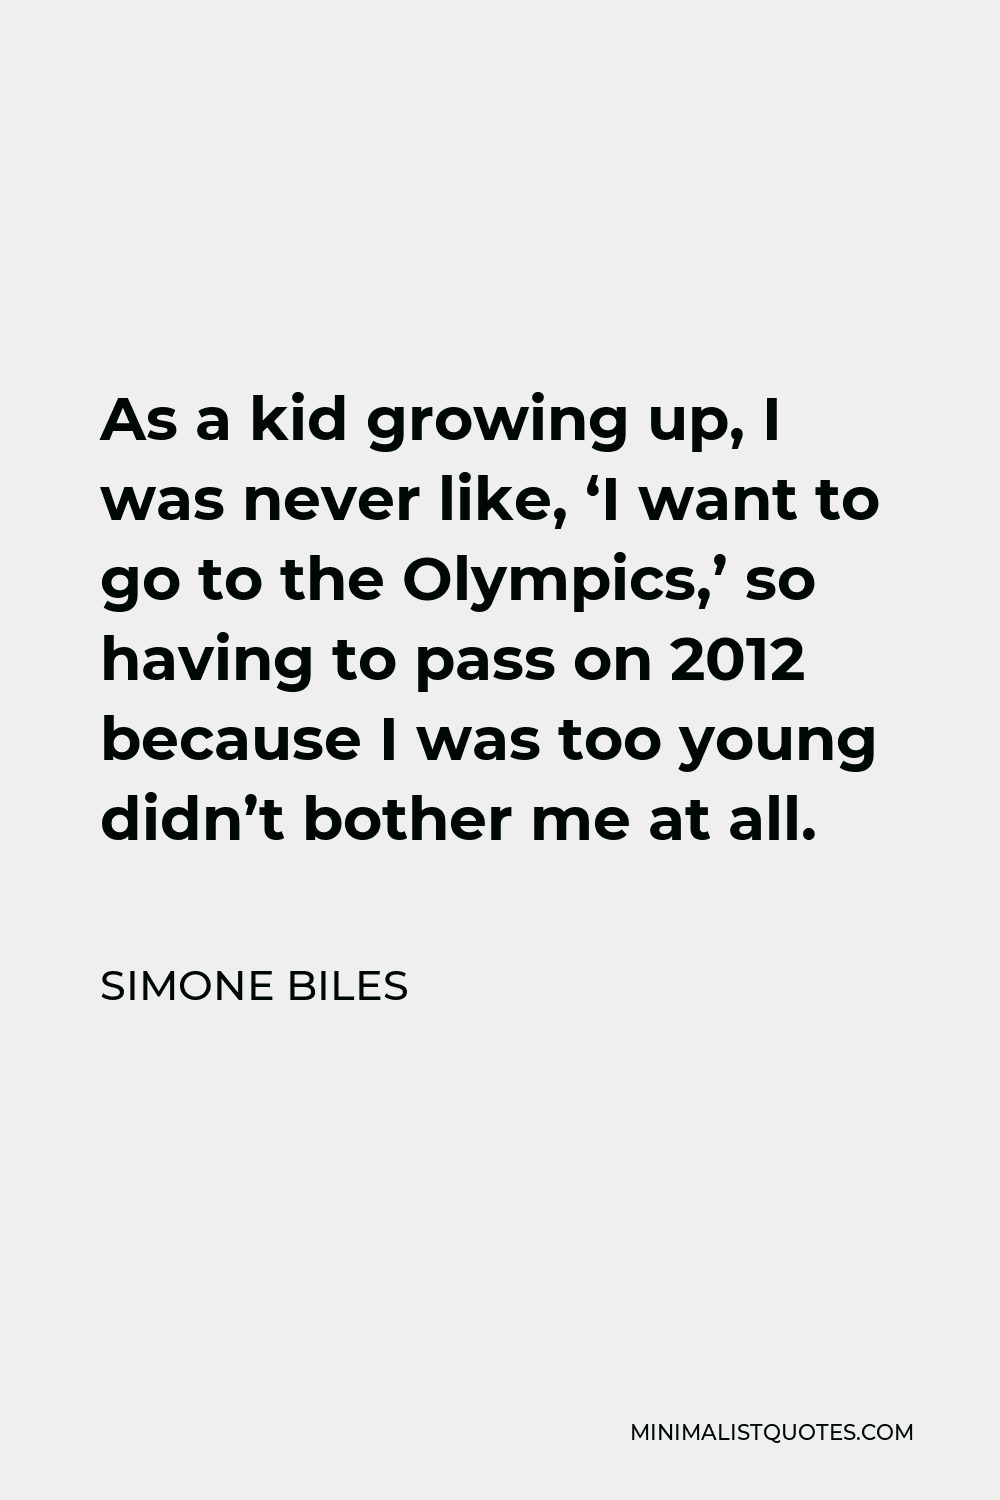 Simone Biles Quote - As a kid growing up, I was never like, ‘I want to go to the Olympics,’ so having to pass on 2012 because I was too young didn’t bother me at all.